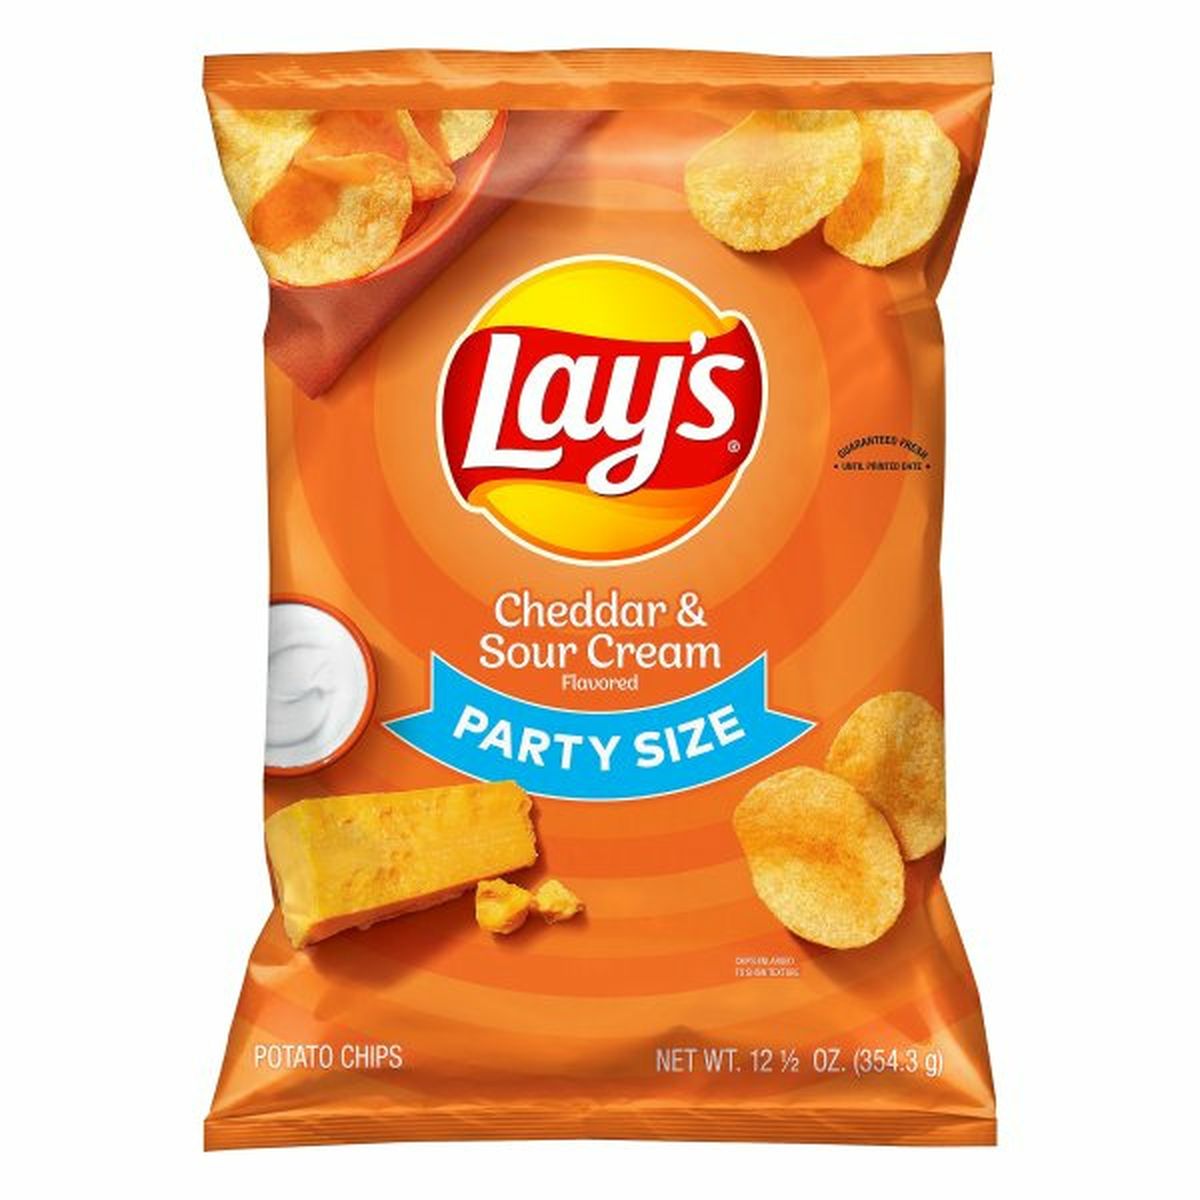 Calories in Lay's Potato Chips, Cheddar & Sour Cream, Party Size